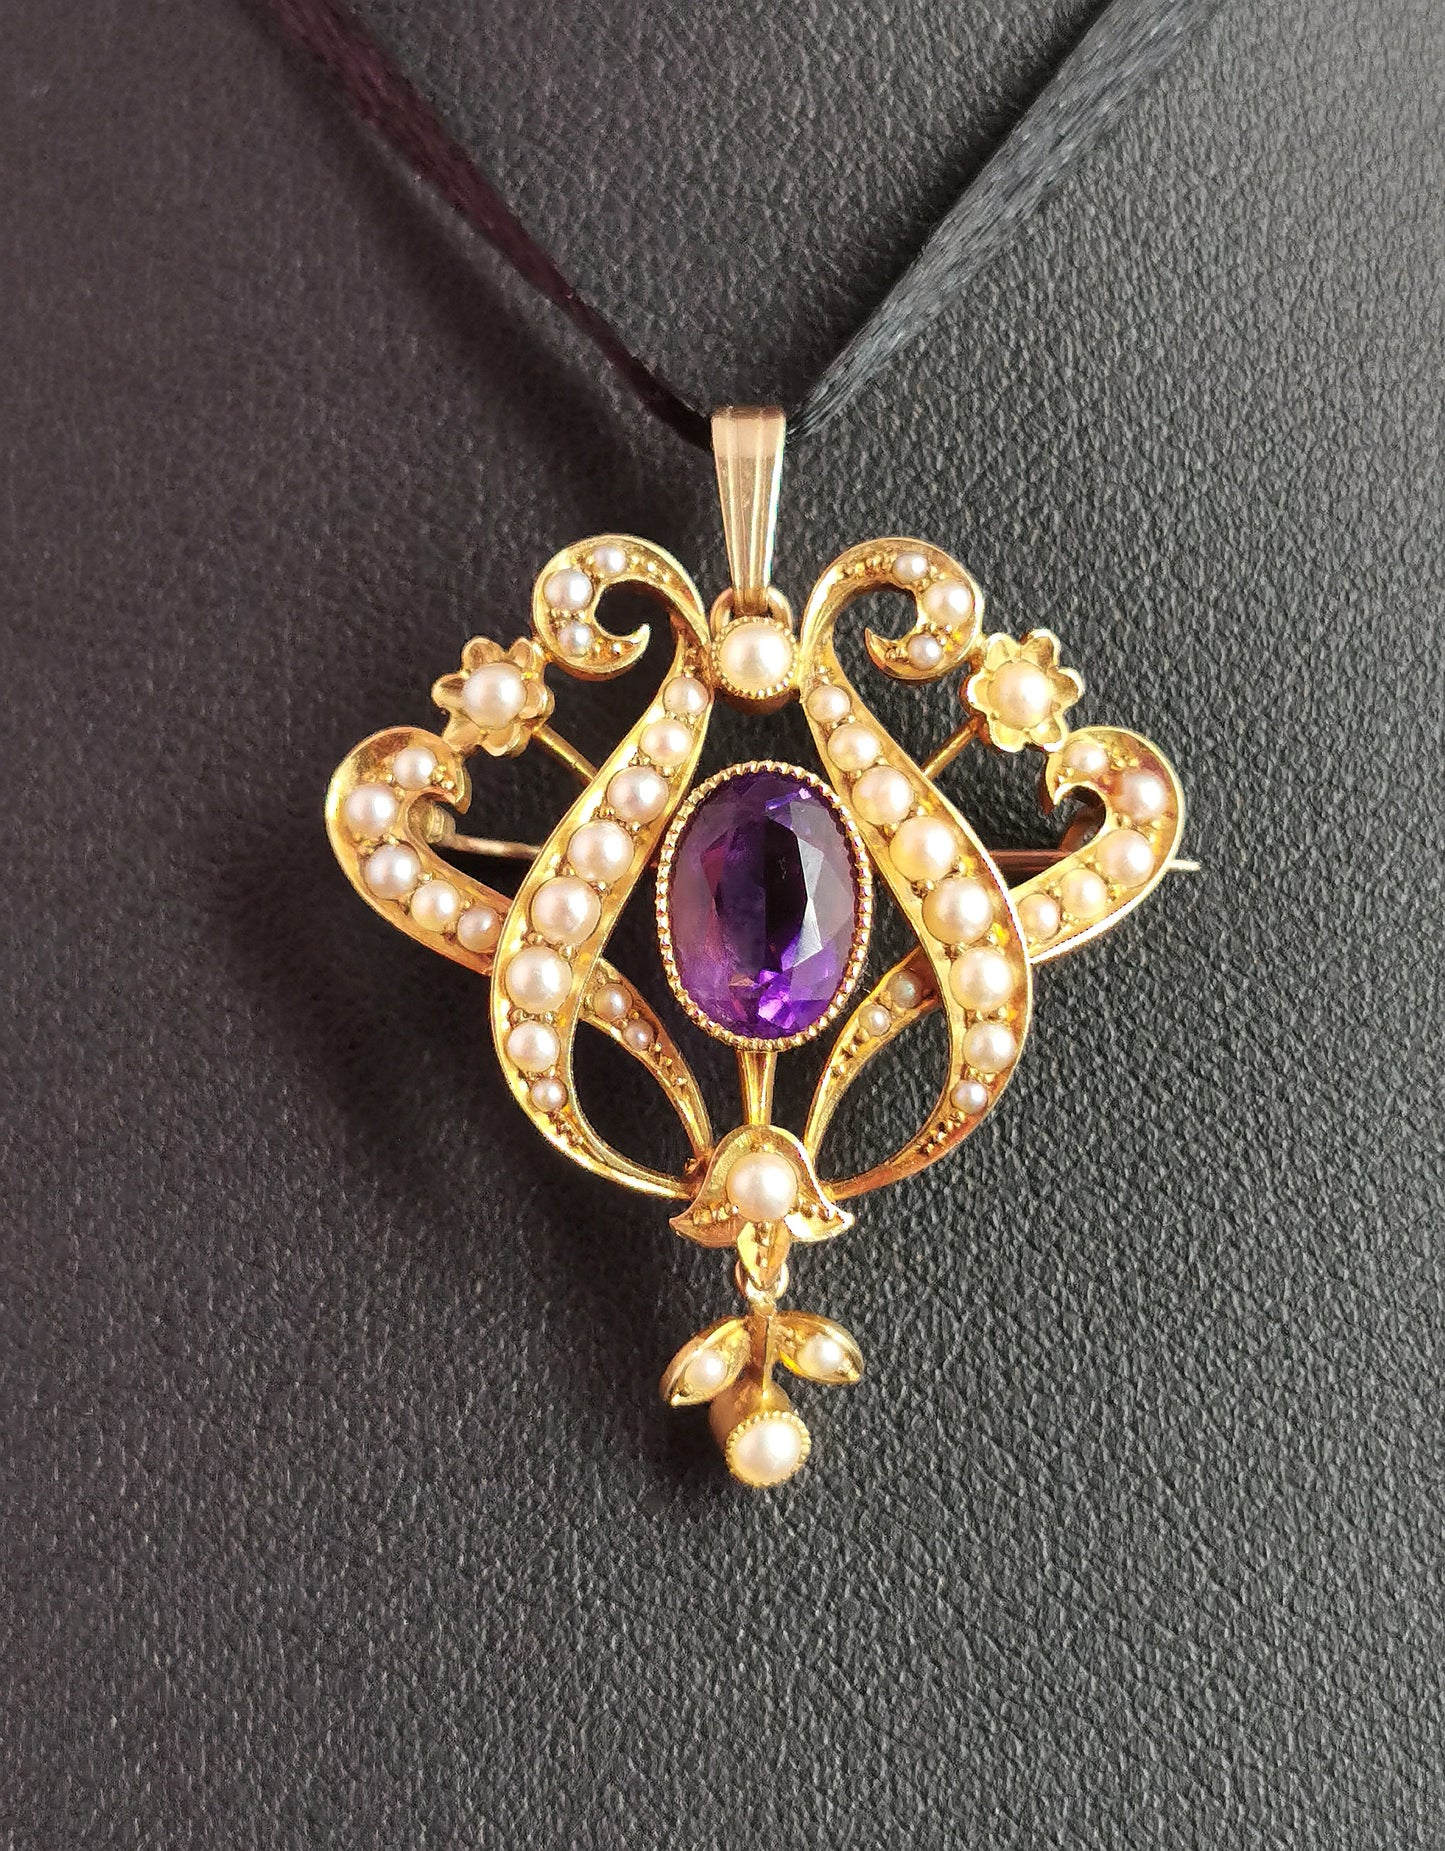 Antique Art Nouveau Amethyst and pearl pendant brooch, 15ct gold